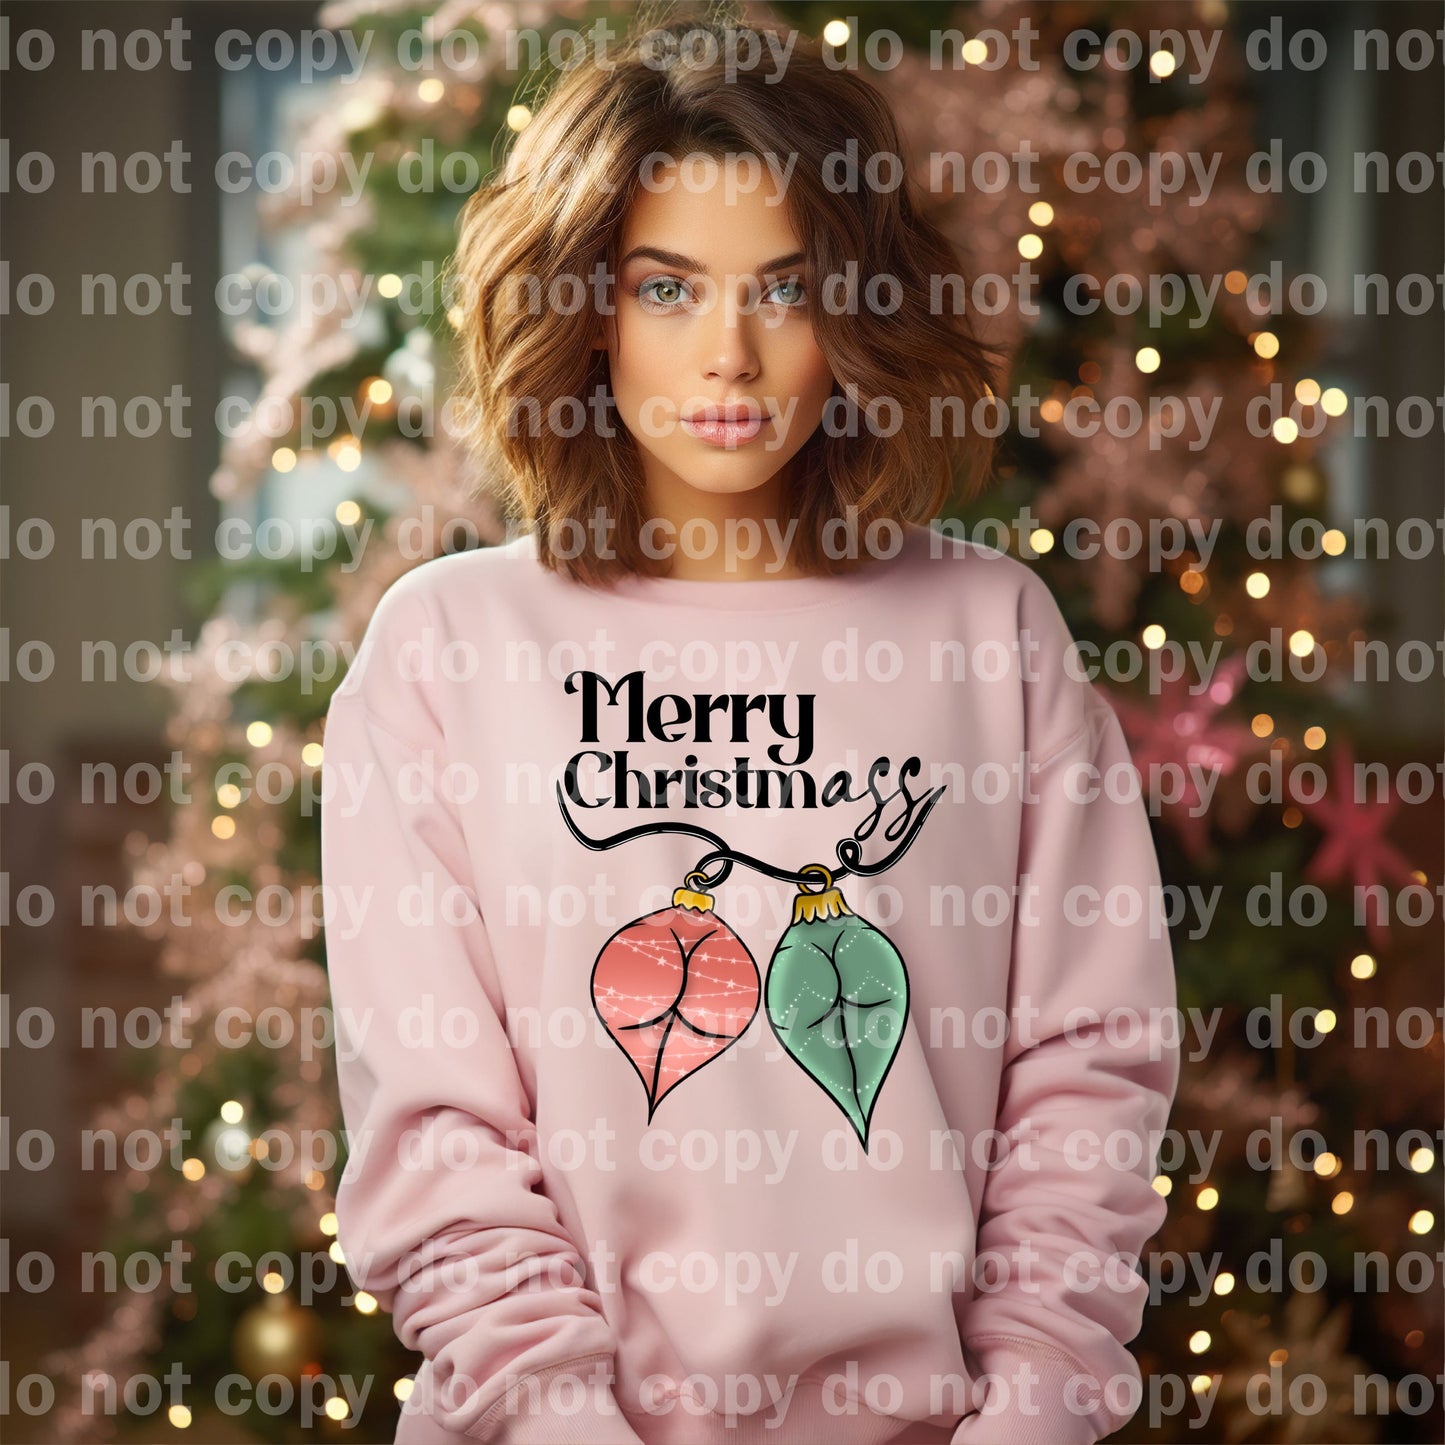 Merry Christmass Ass Bulb with Optional Sleeve Design Dream Print or Sublimation Print